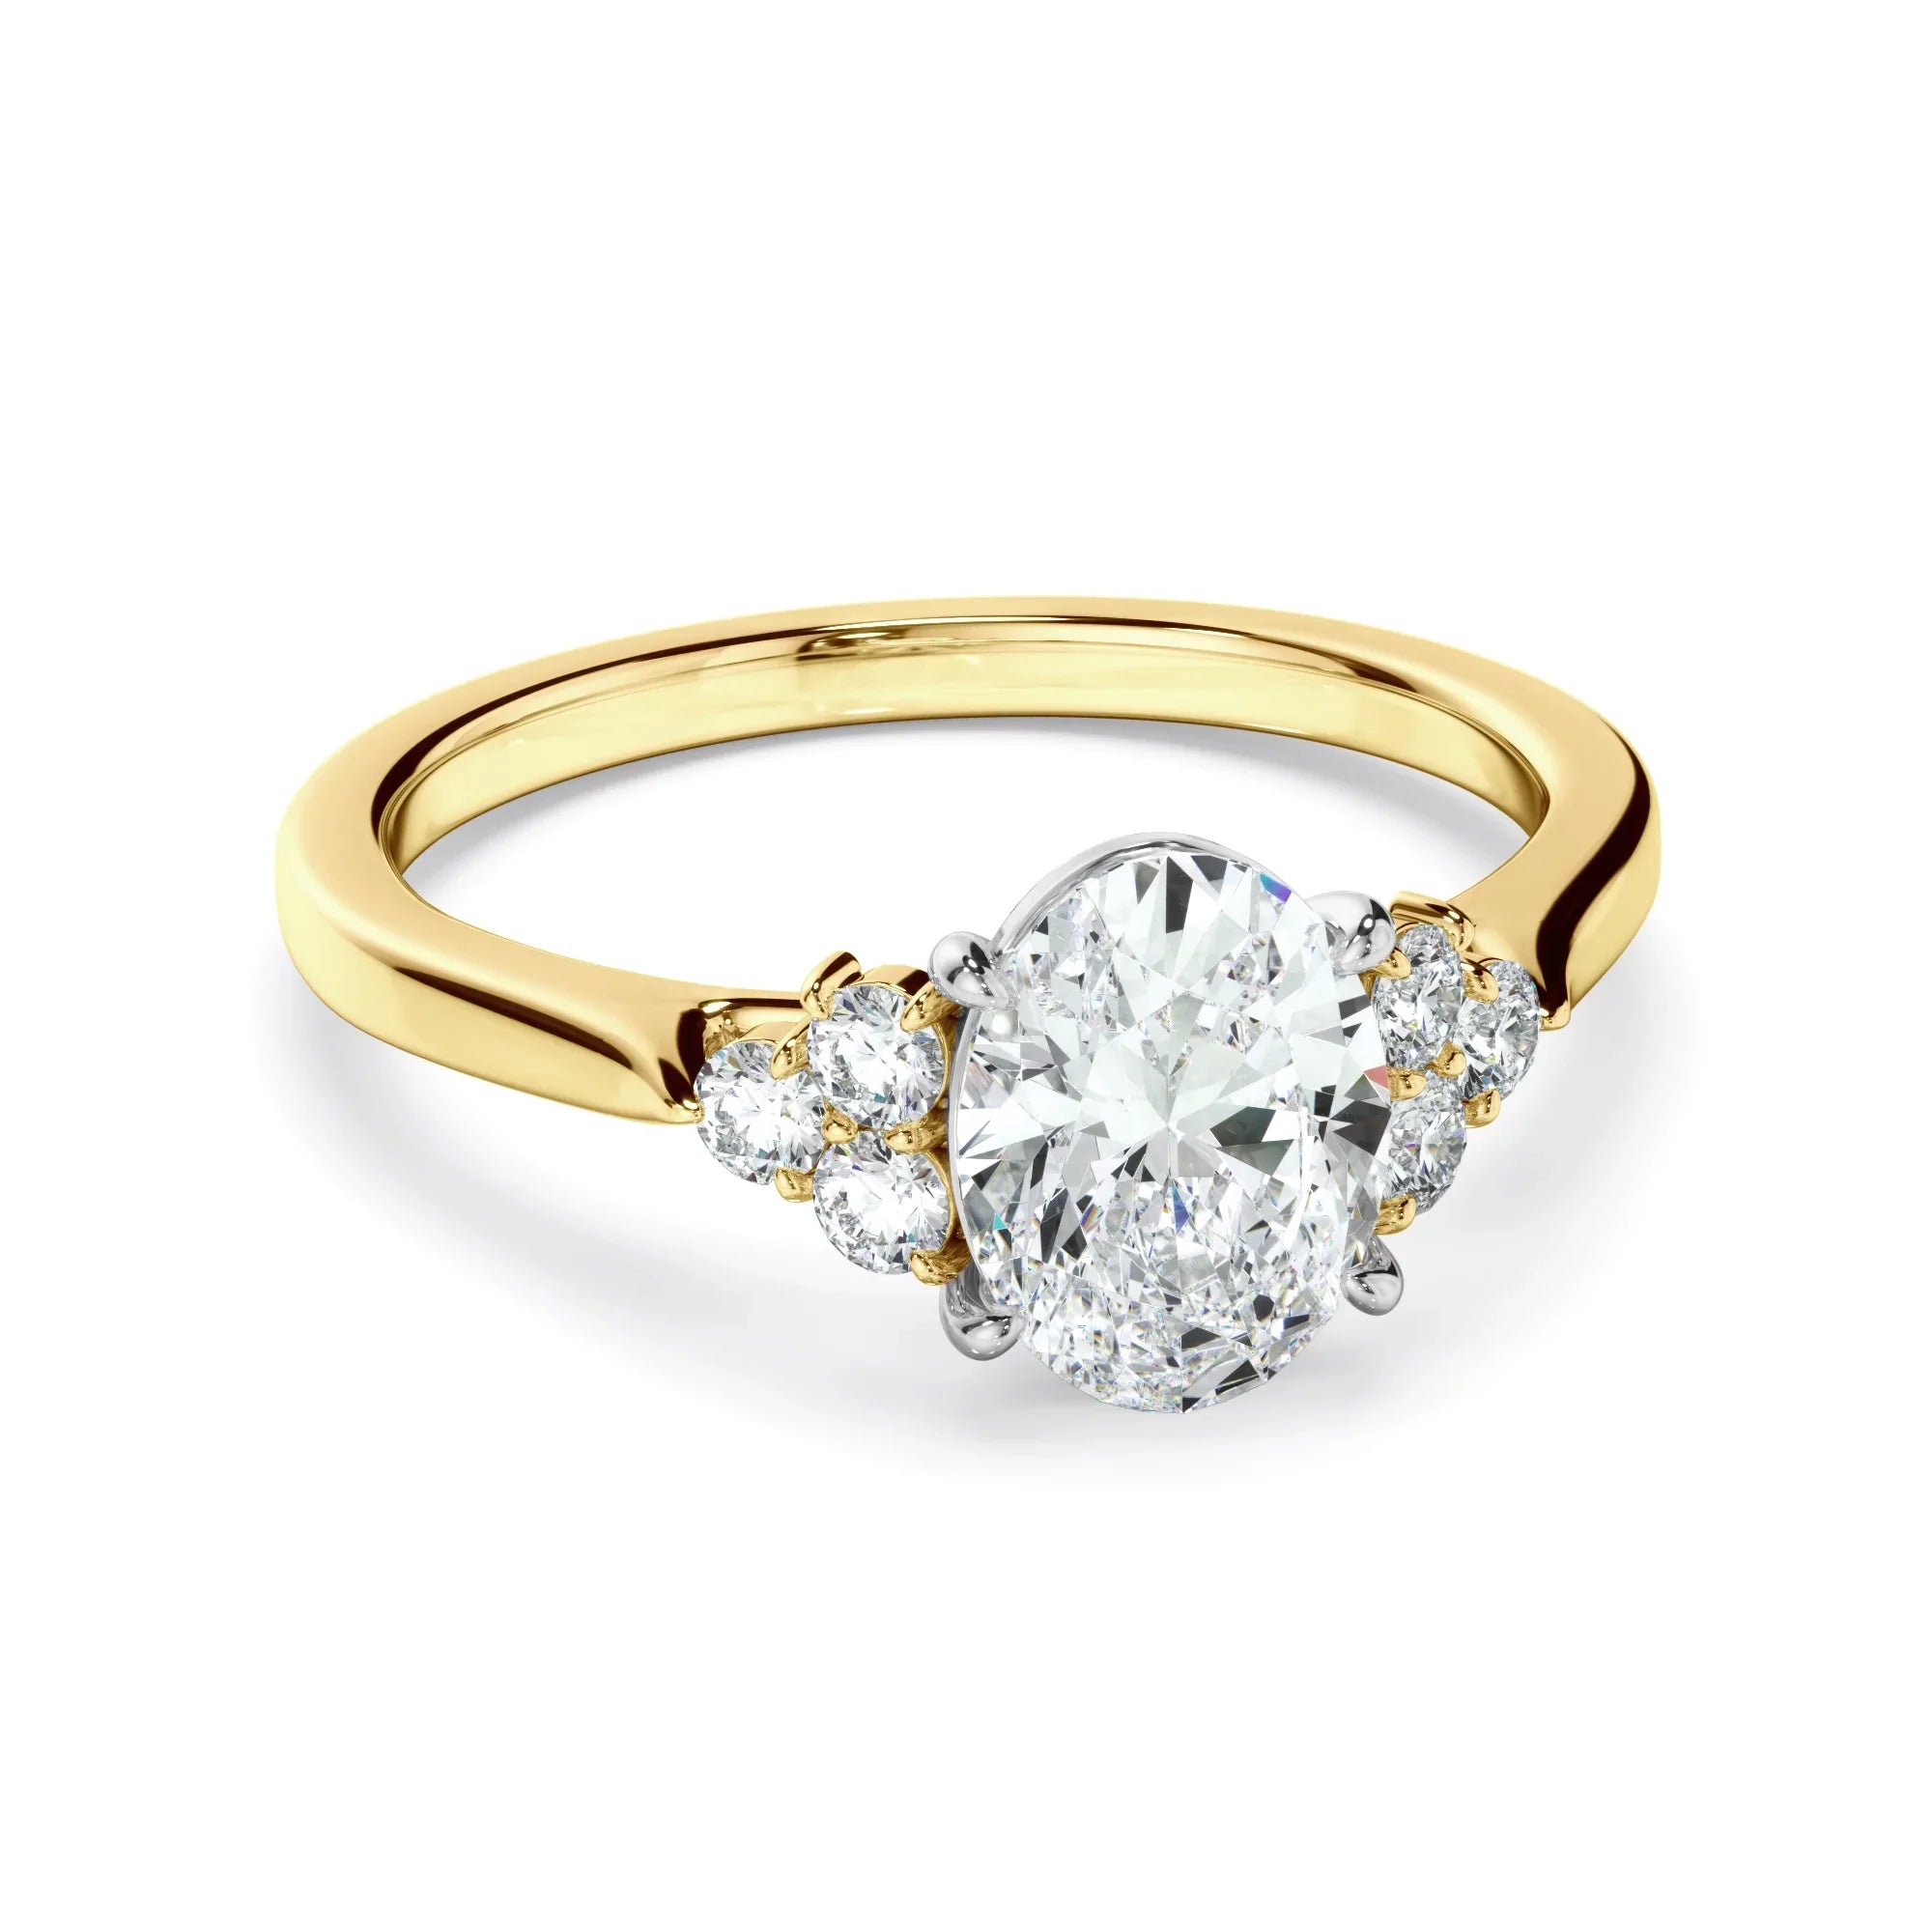 Oval Cut Diamond Engagement Ring With Diamond Cluster Sides